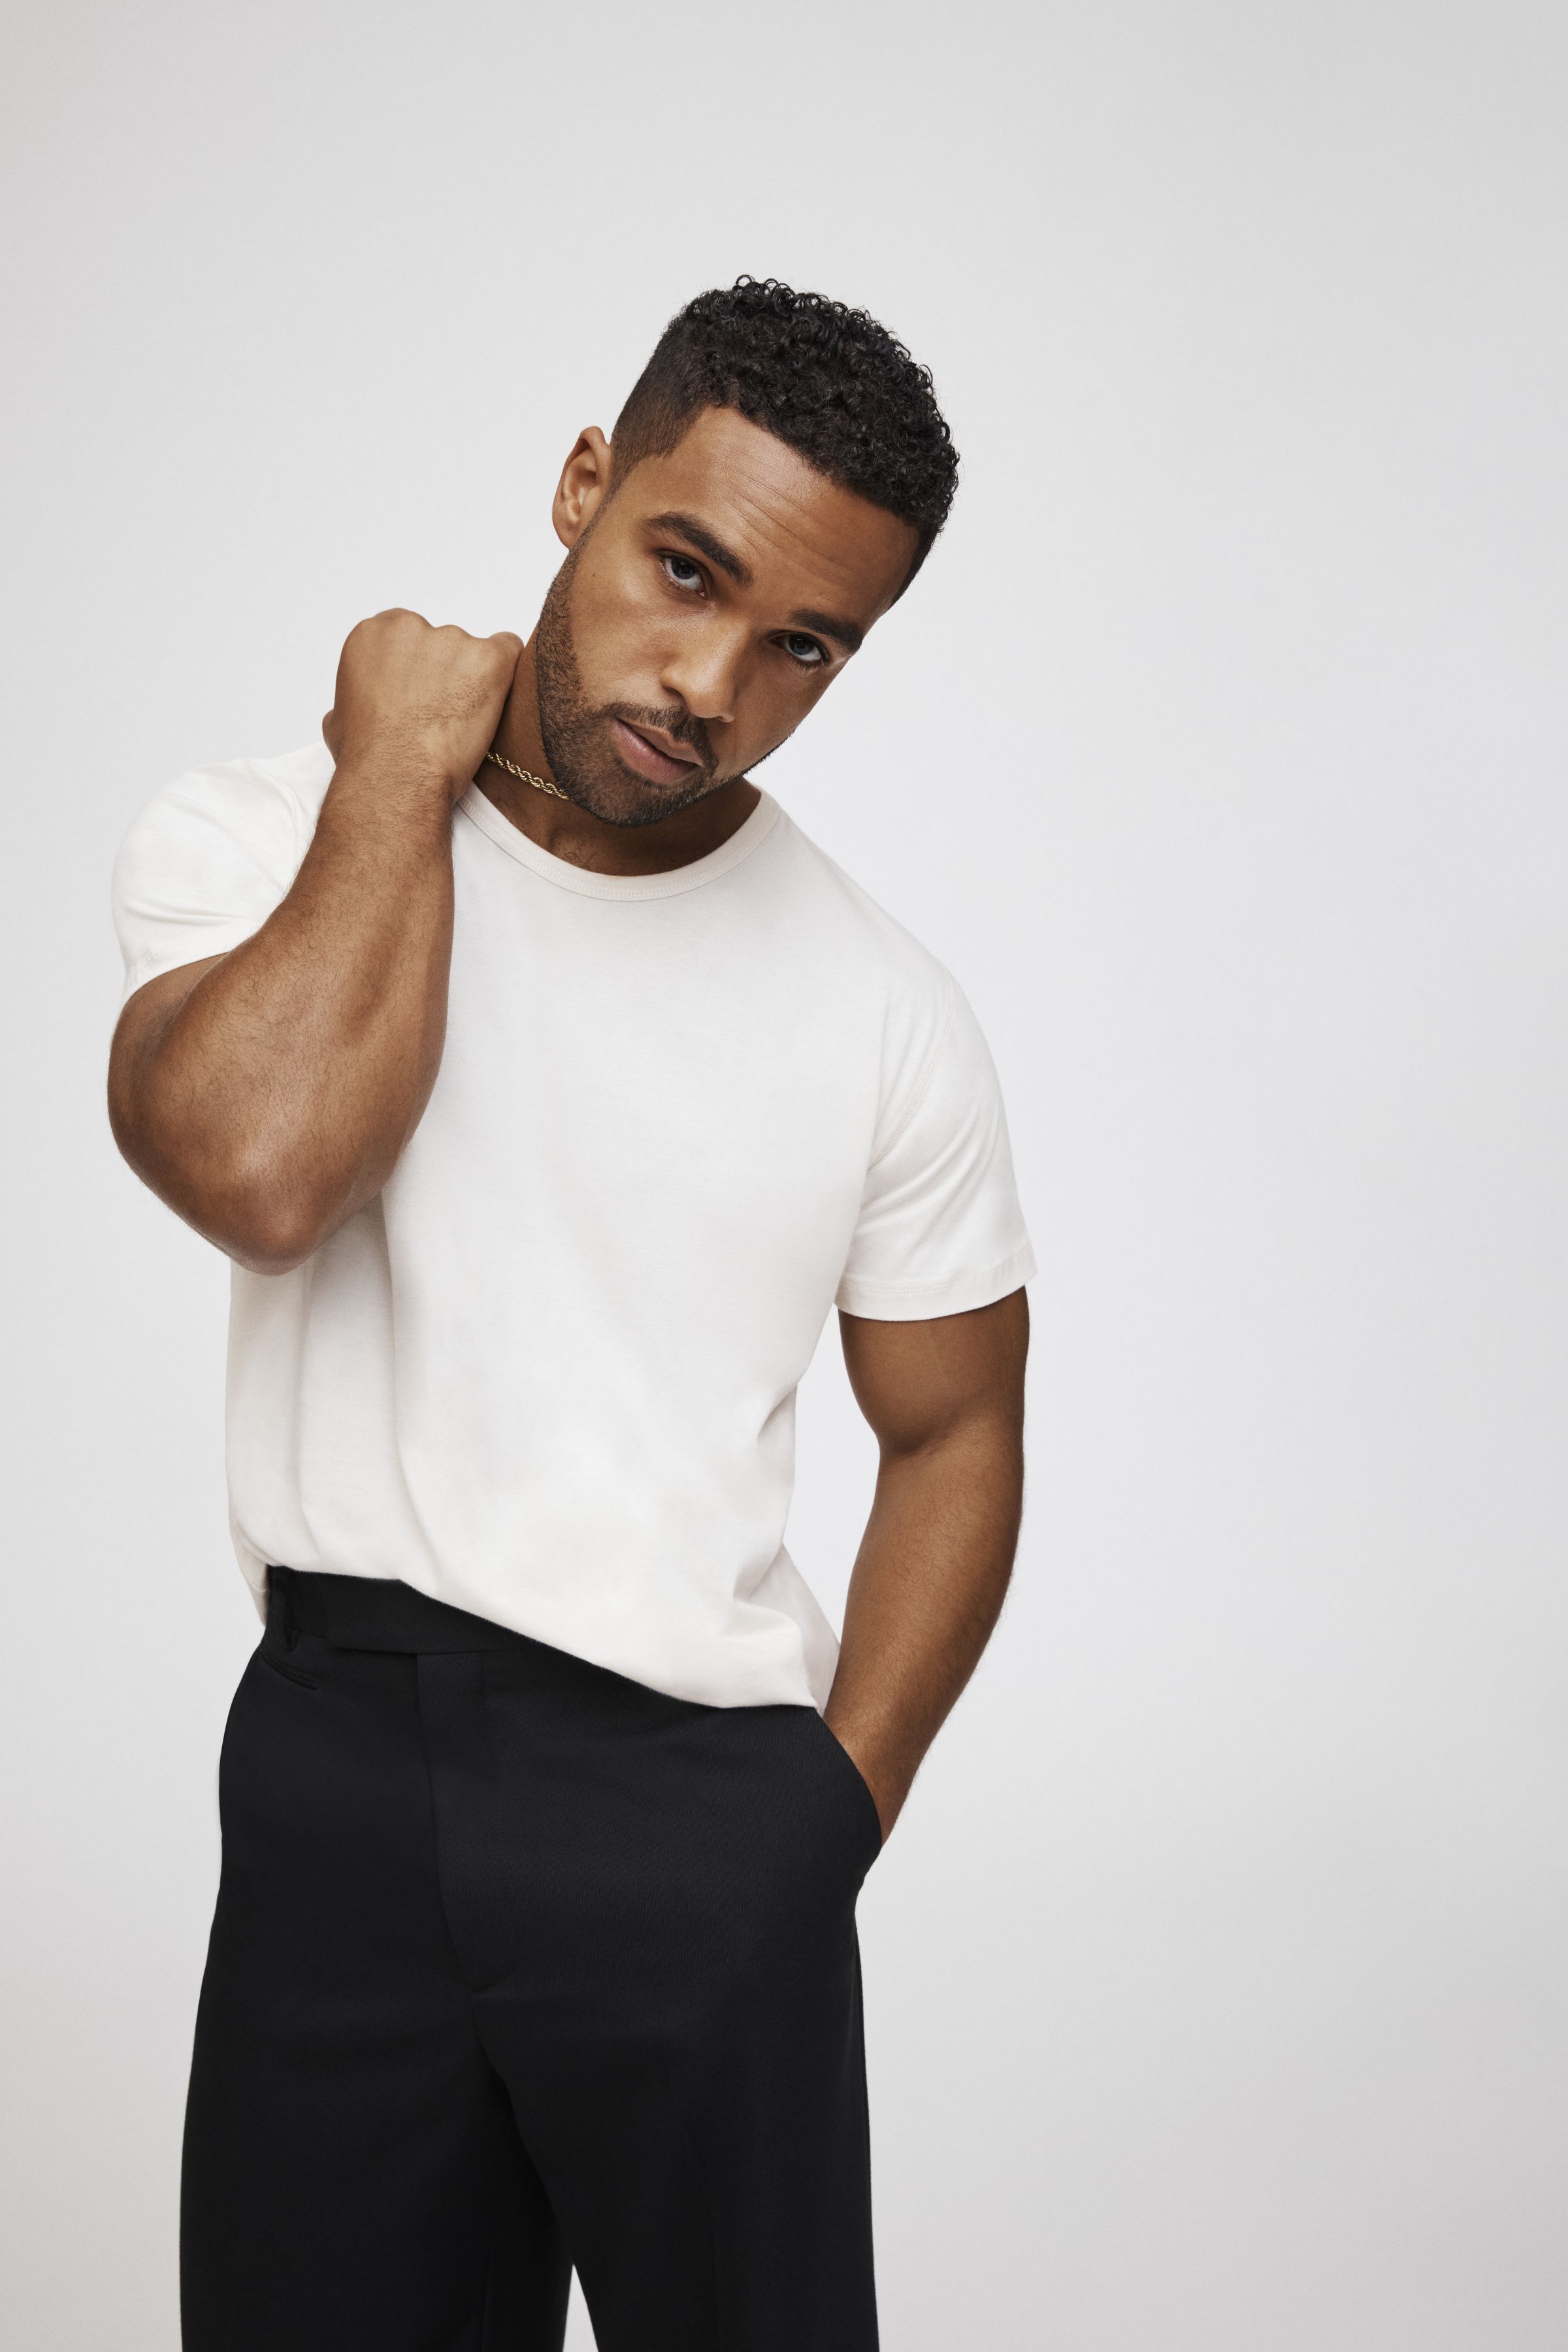 Say Who - Lucien Laviscount